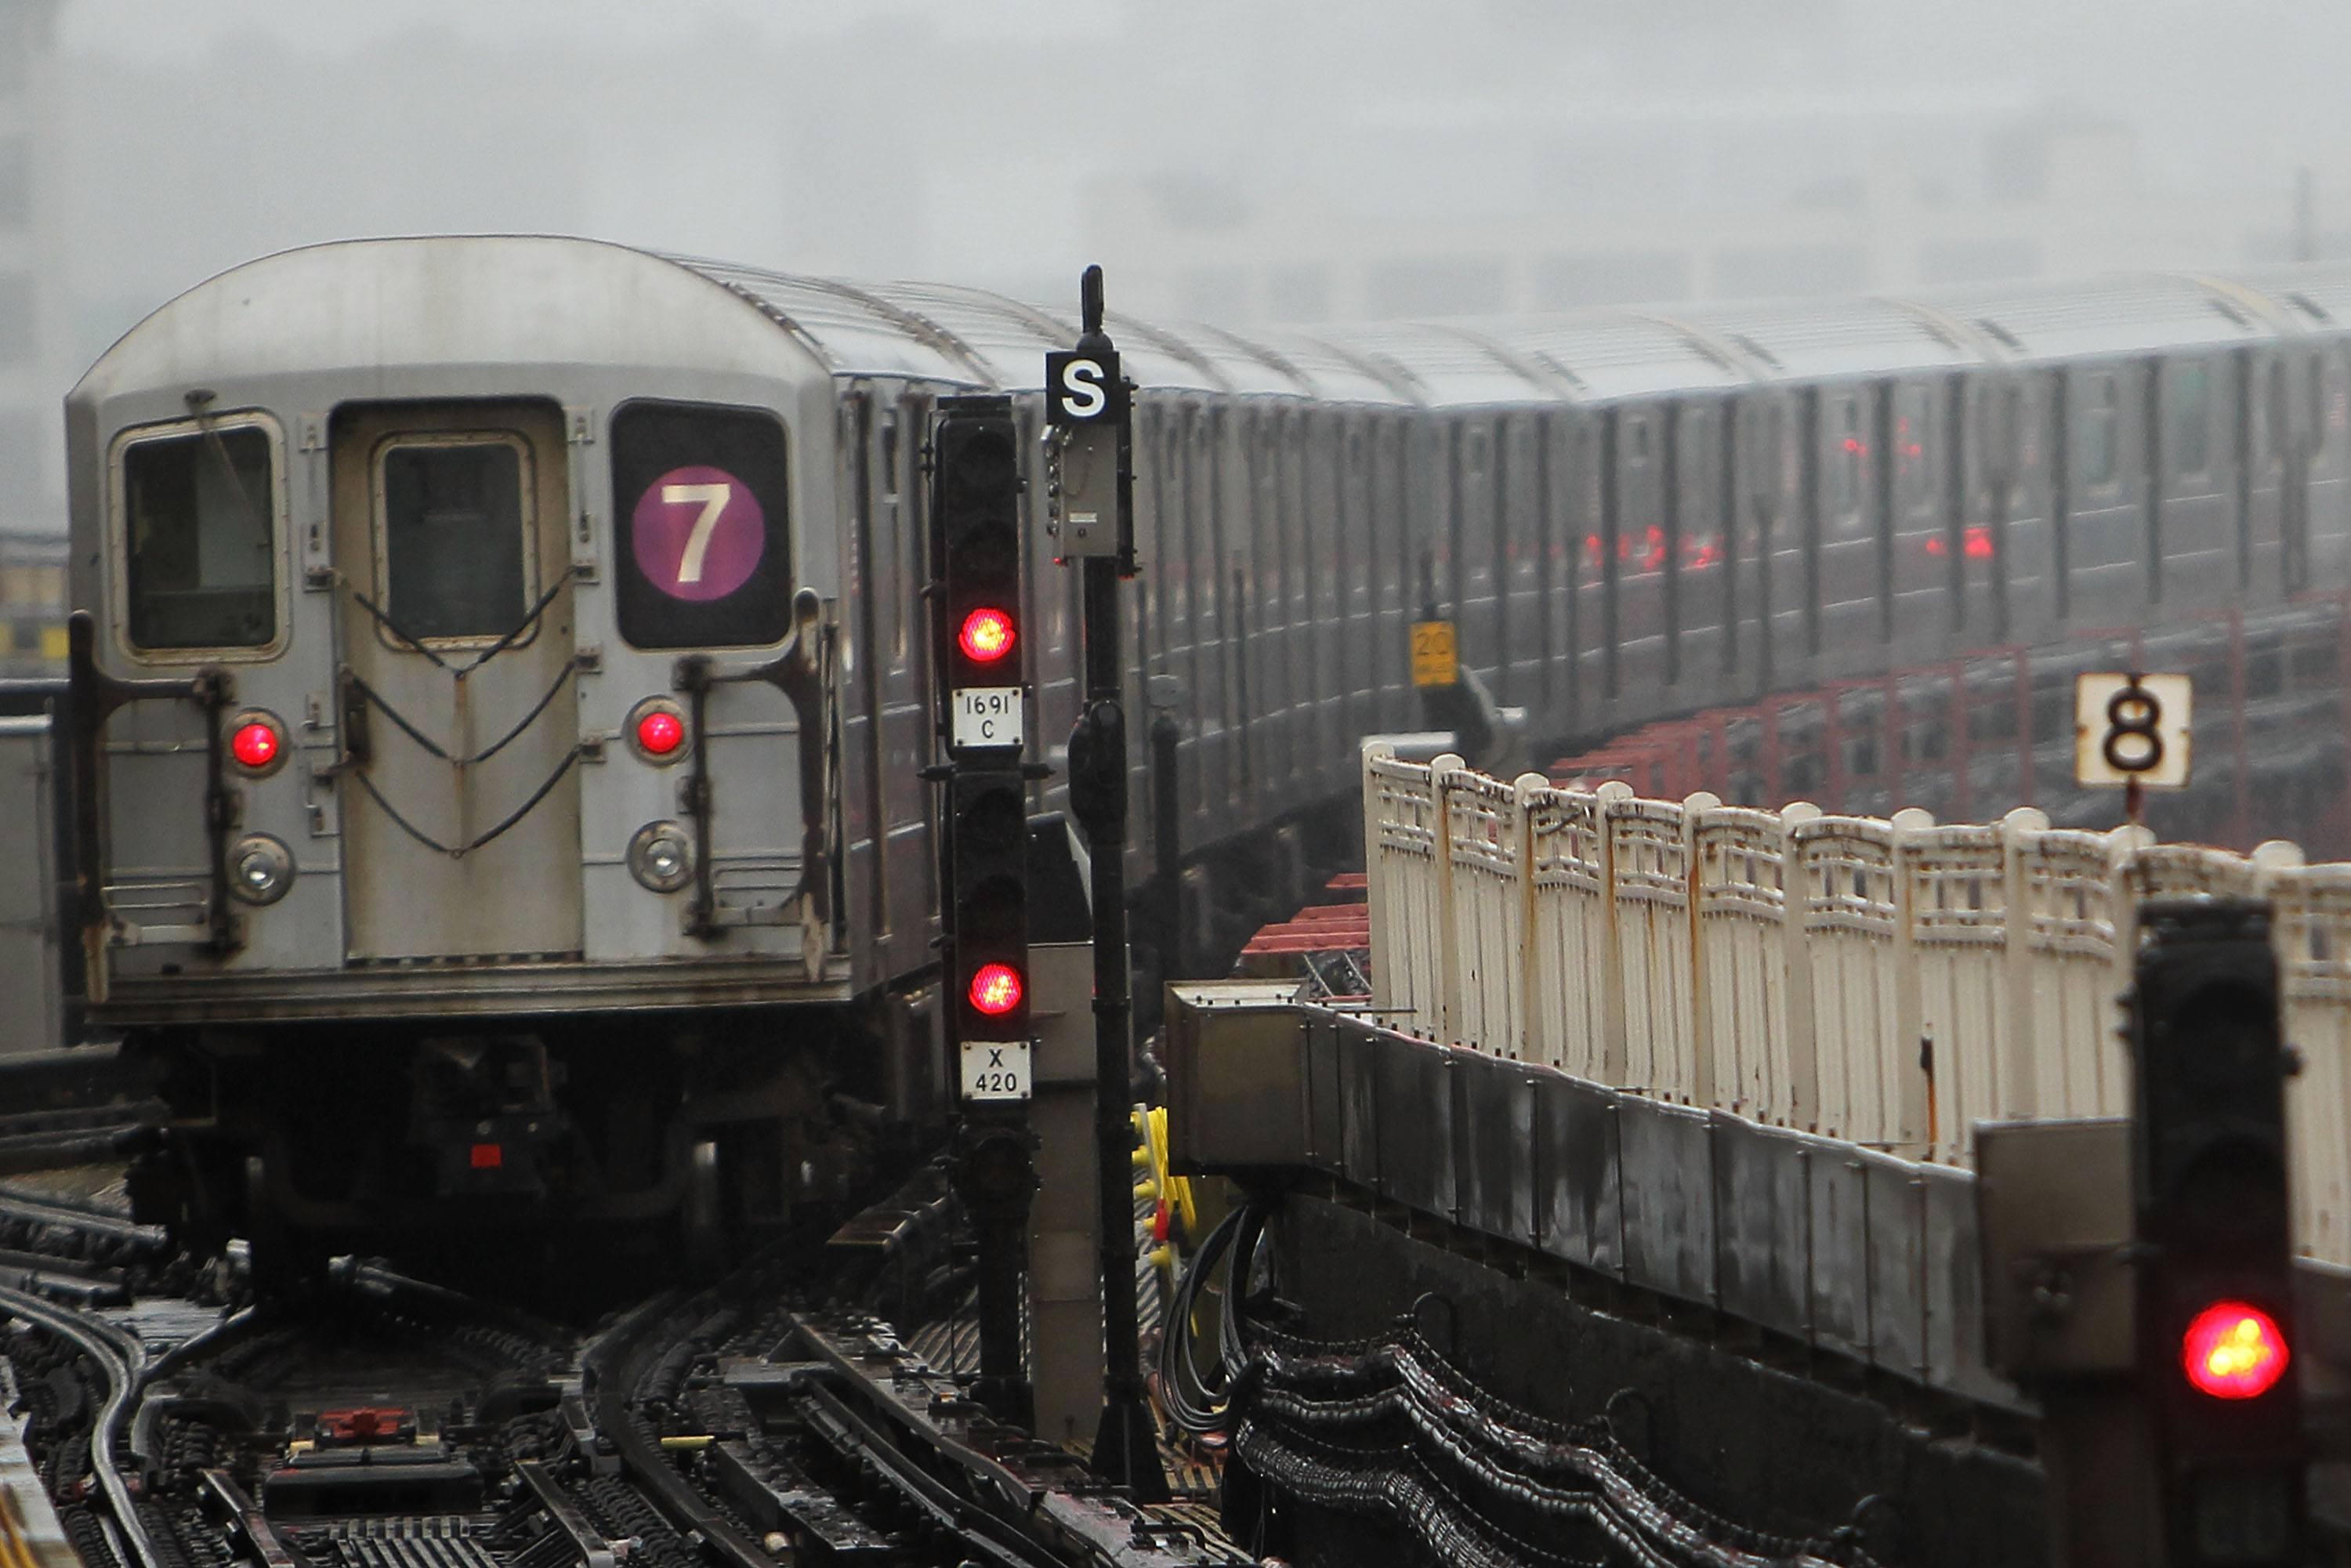 A New York City Subway train pulls away from a station